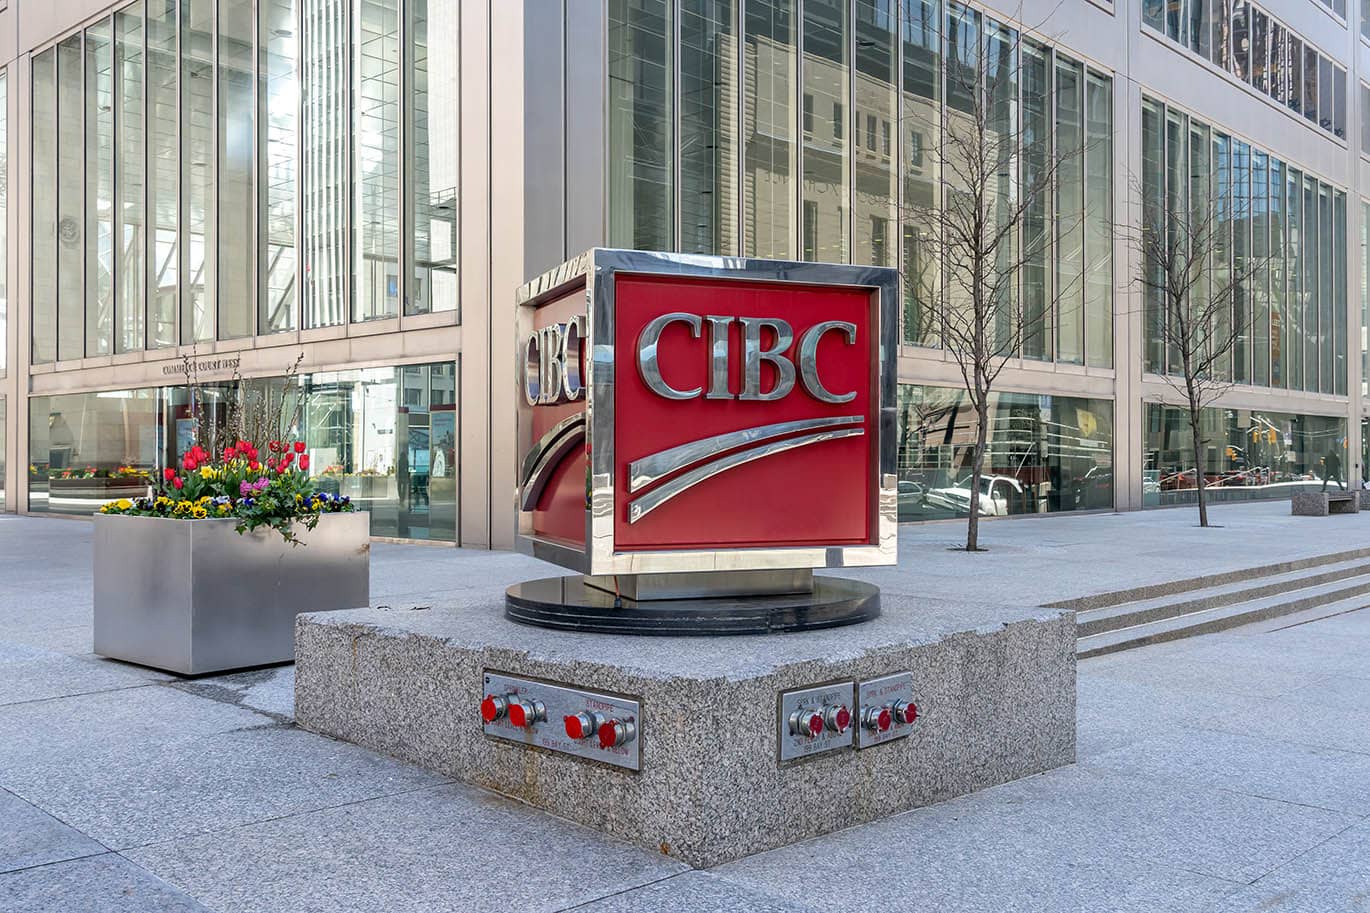 CIBC exchange rate forecasts for CAD